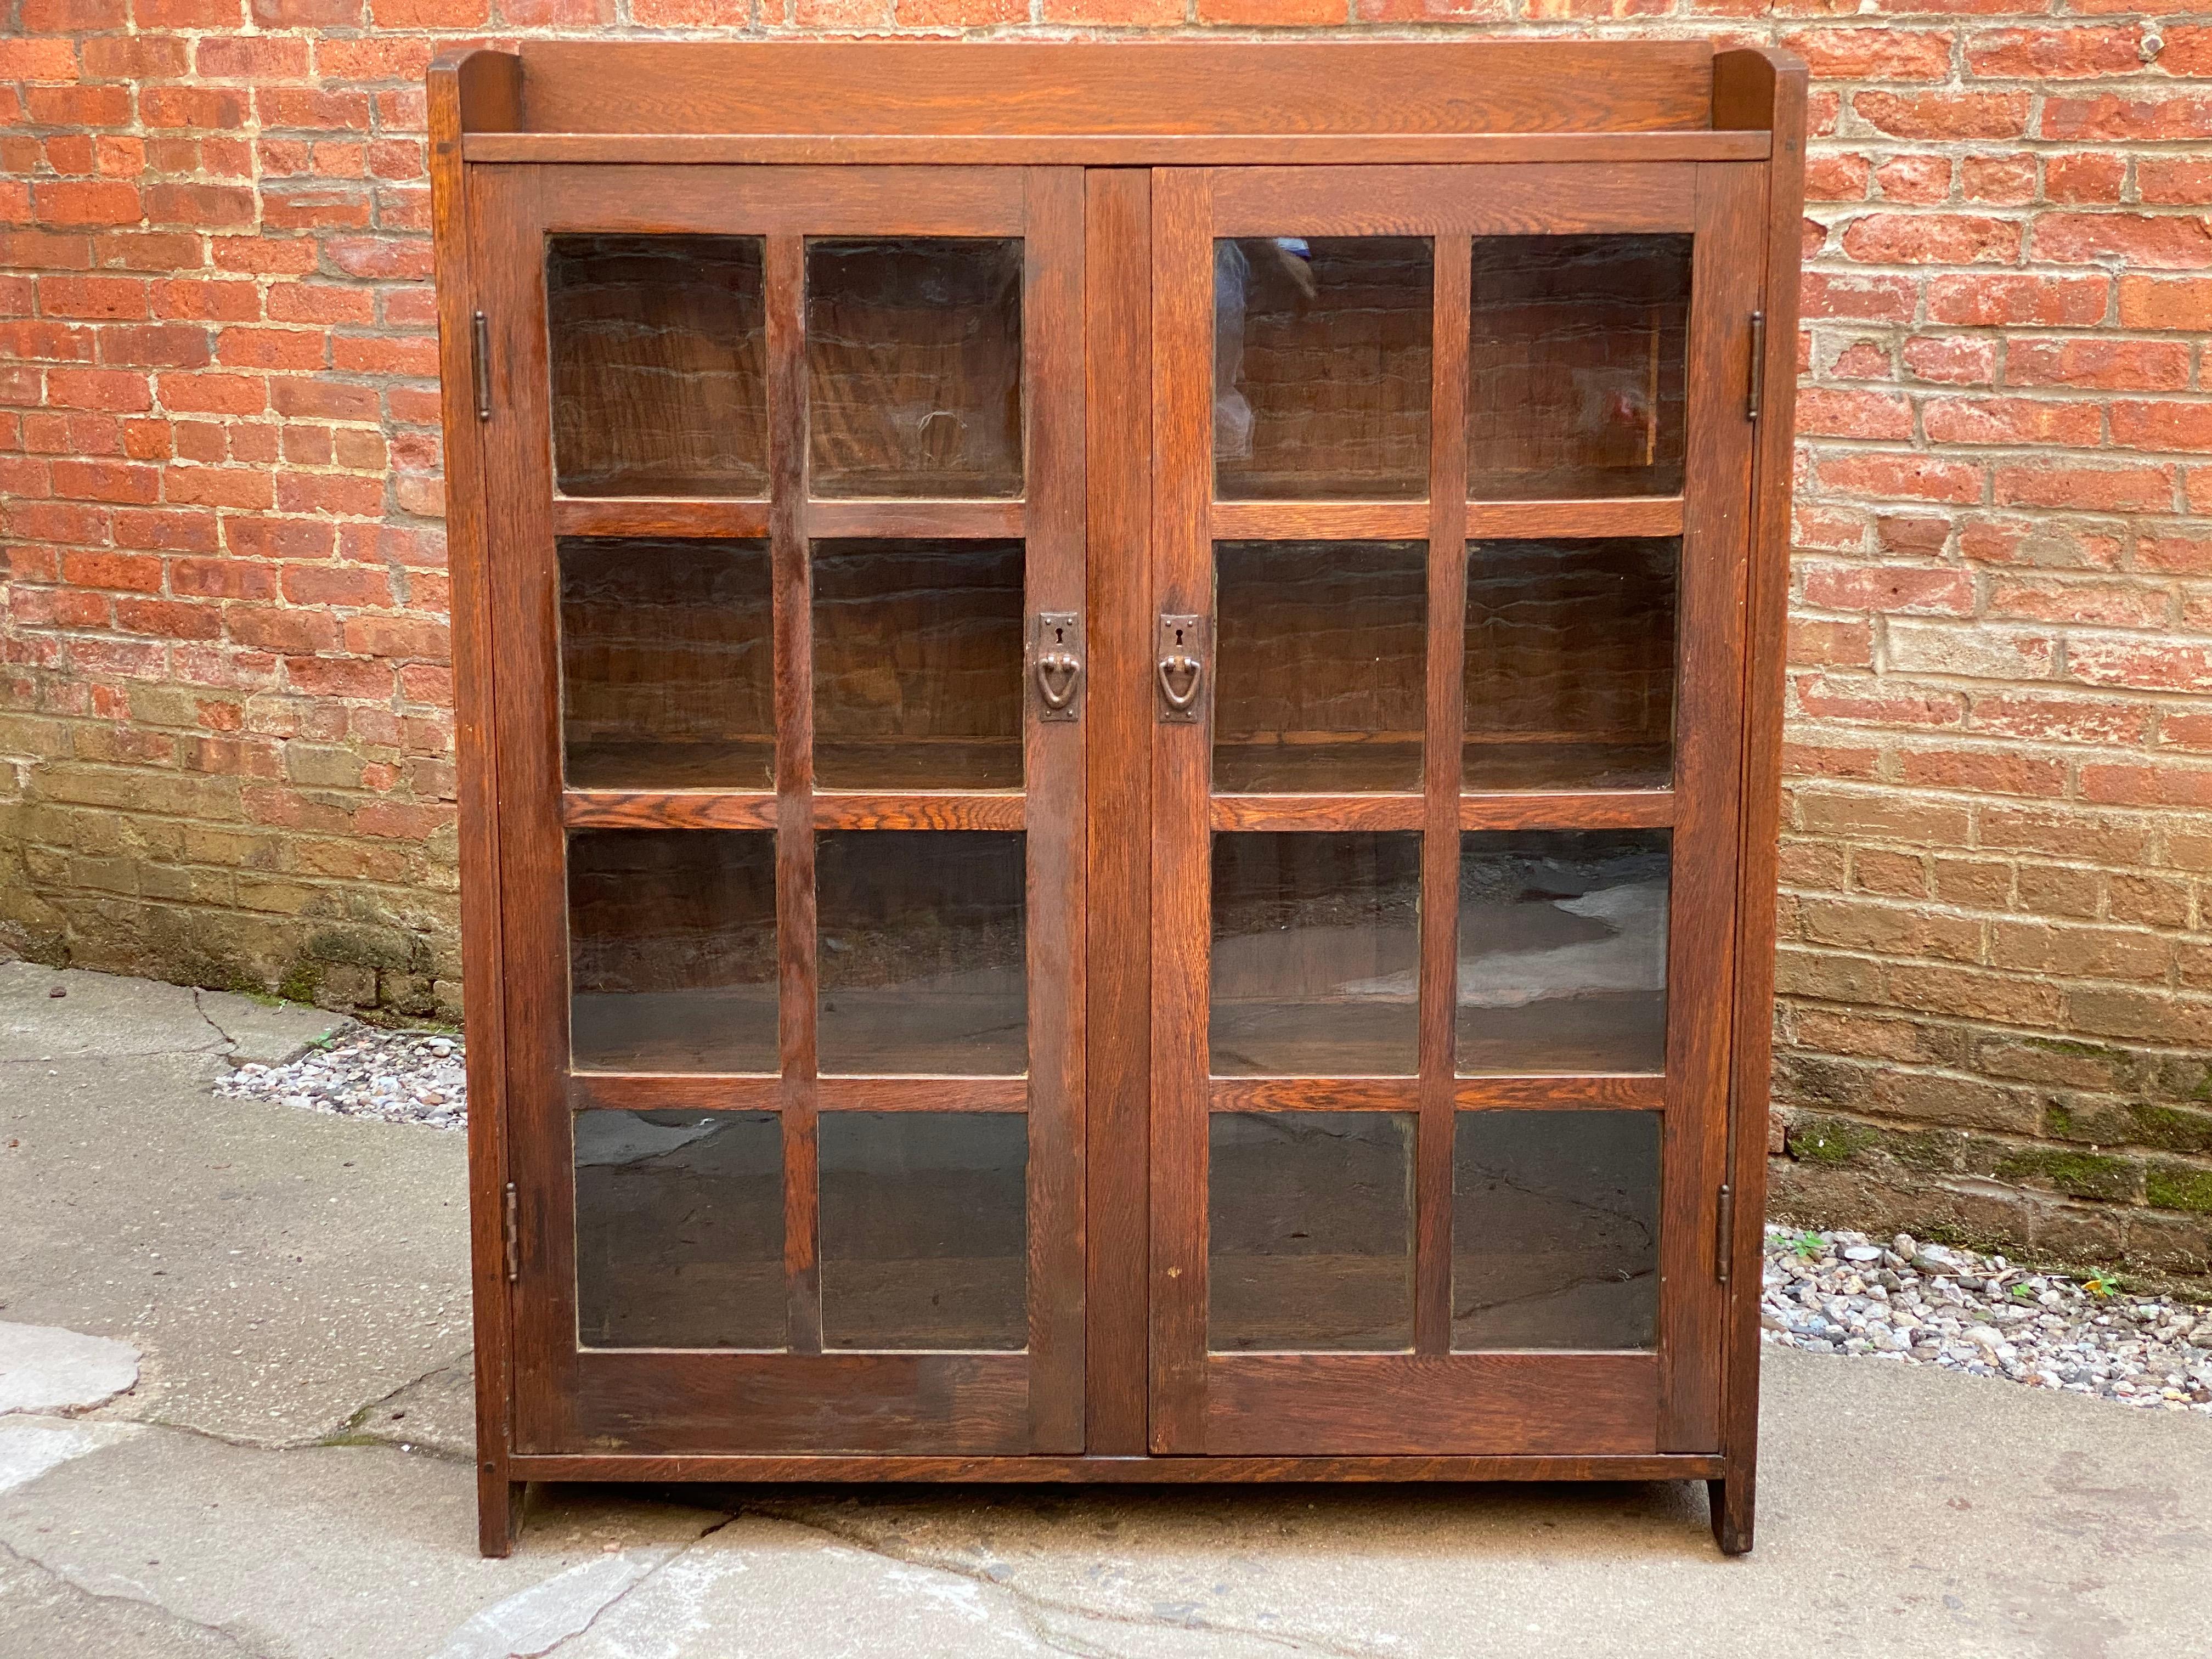 Gustav Stickley #717 American quarter sawn oak double door bookcase. Original handwrought copper hardware, glass and finish. Exposed Tenon and dowel construction. The mullions are all in line with the fixed book shelves, which is a wonderful Gustav